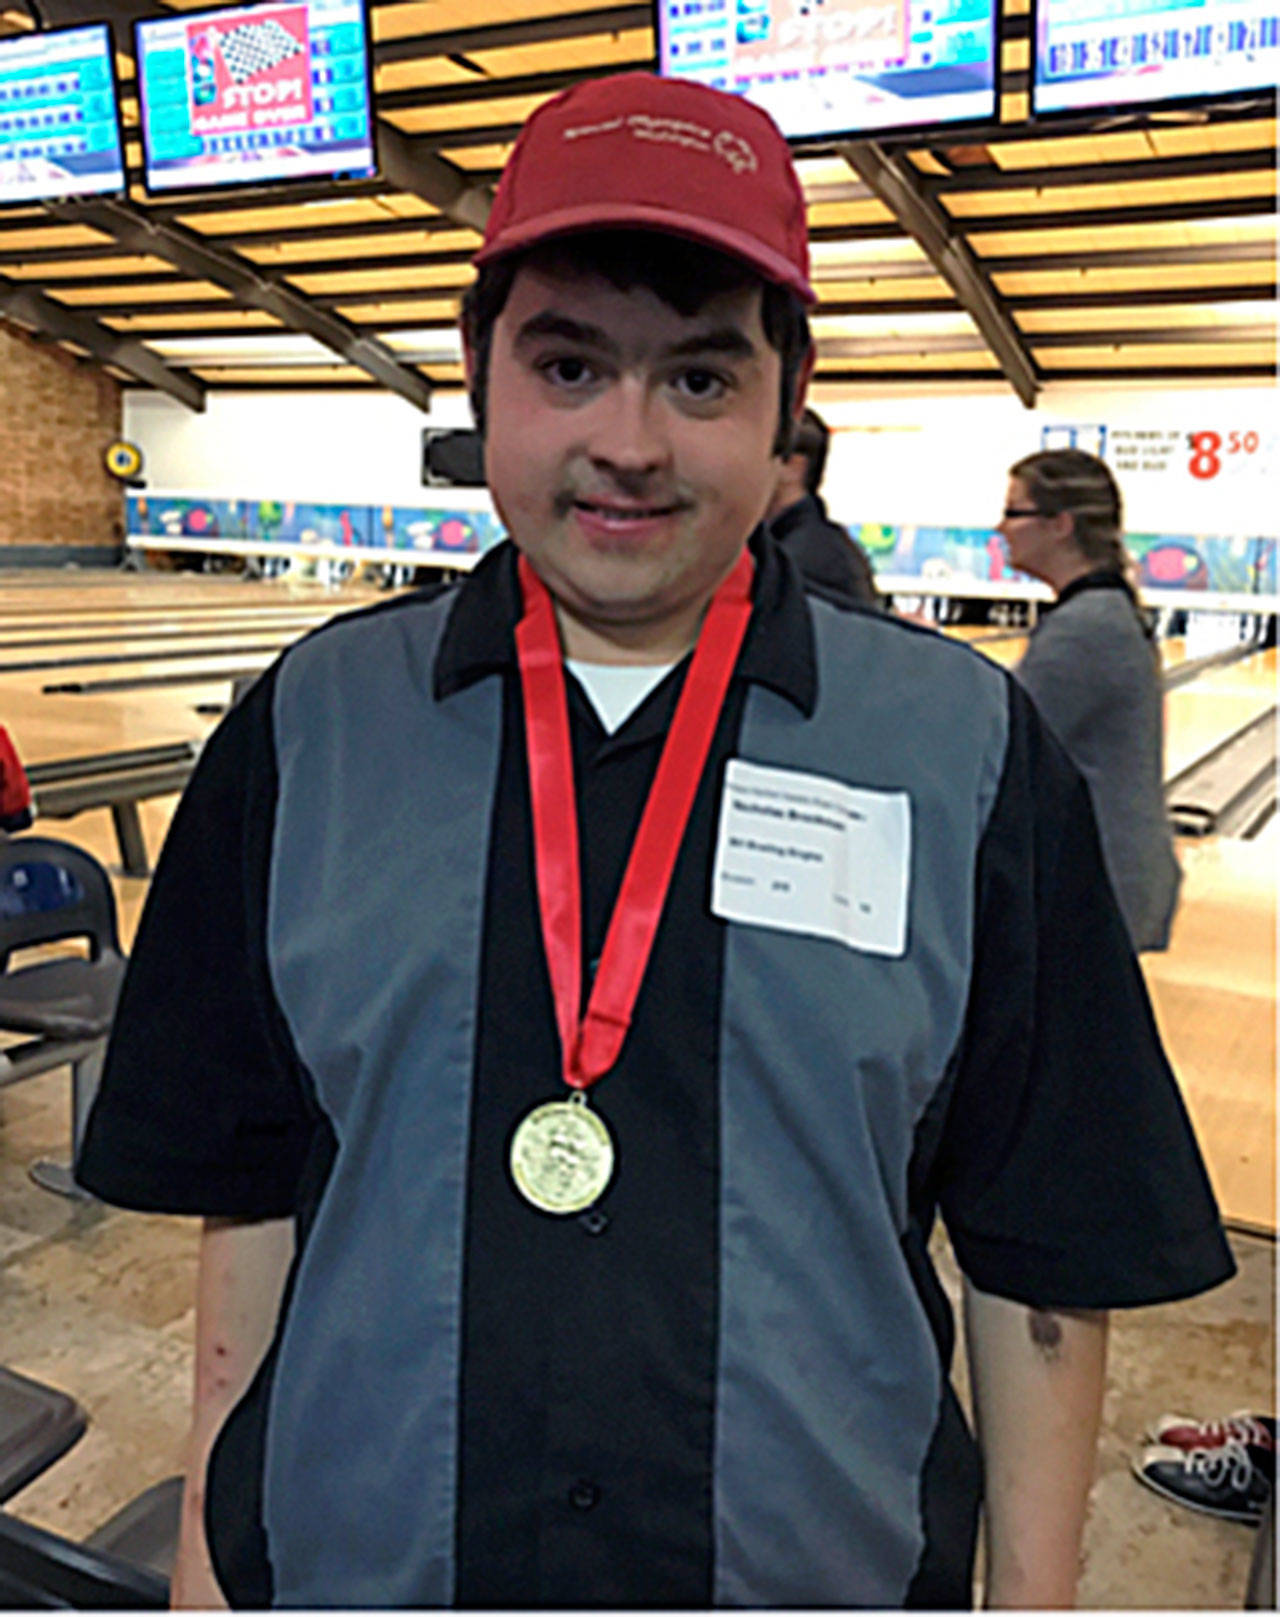 Nick Brockman poses with a gold medal he won at a Special Olympics regional meet in the fall. Brockman was chosen to compete at the 2018 Special Olympics USA Games, which begin on Sunday in Seattle. (Submitted photo)